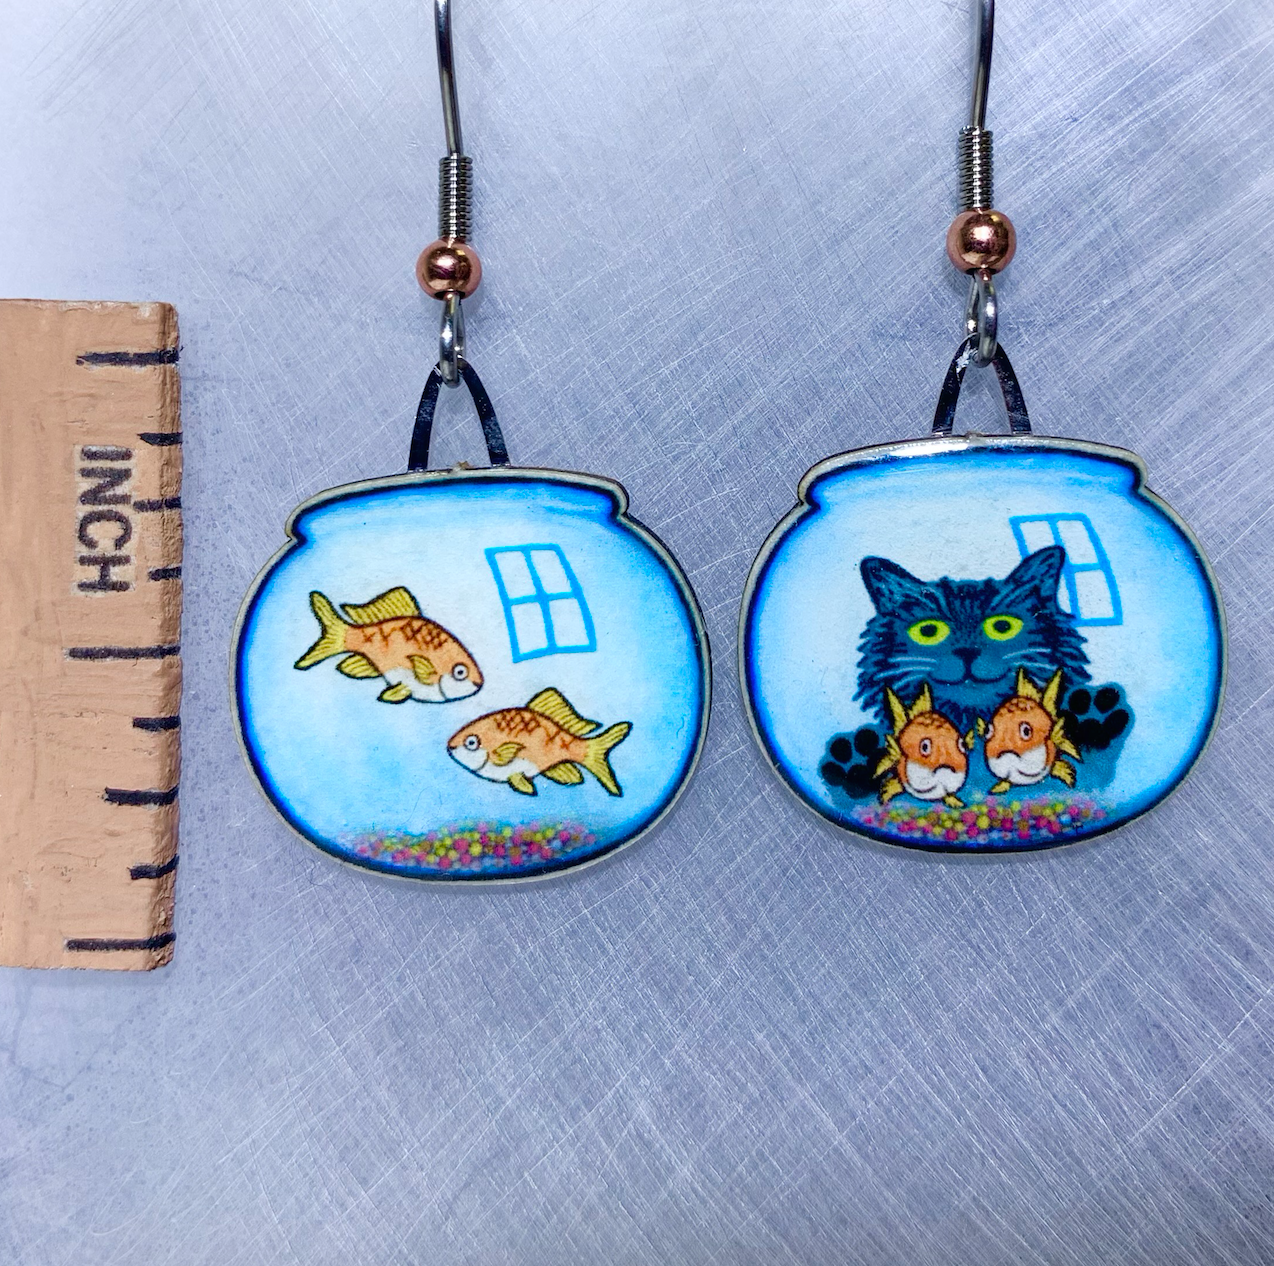 Picture shown is of 1 inch tall pair of earrings of a Fishbowl and Kitty.